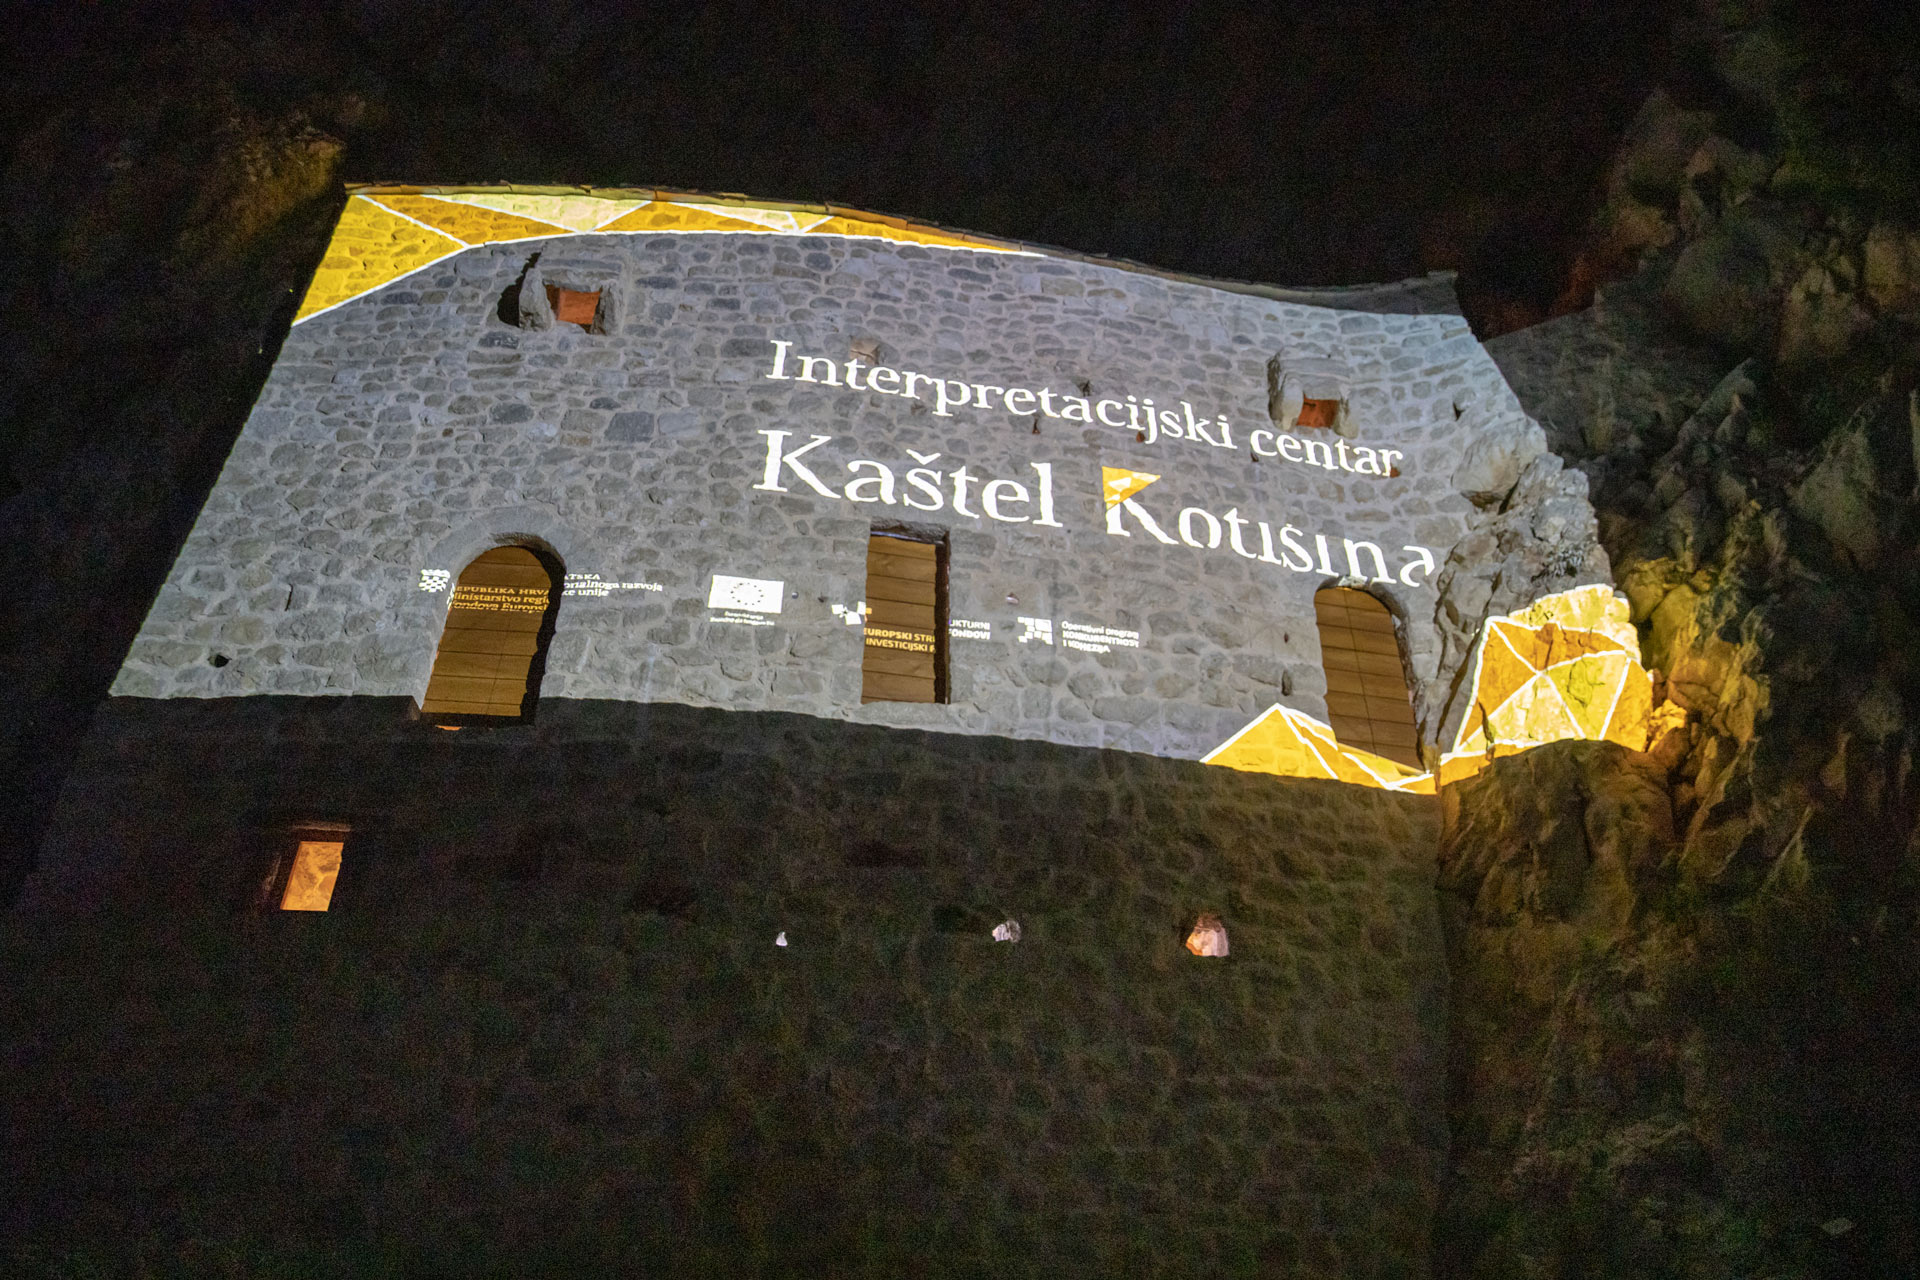 The opening of the Veliki Kaštel Interpretation Center has been postponed until further notice due to epidemiological measures